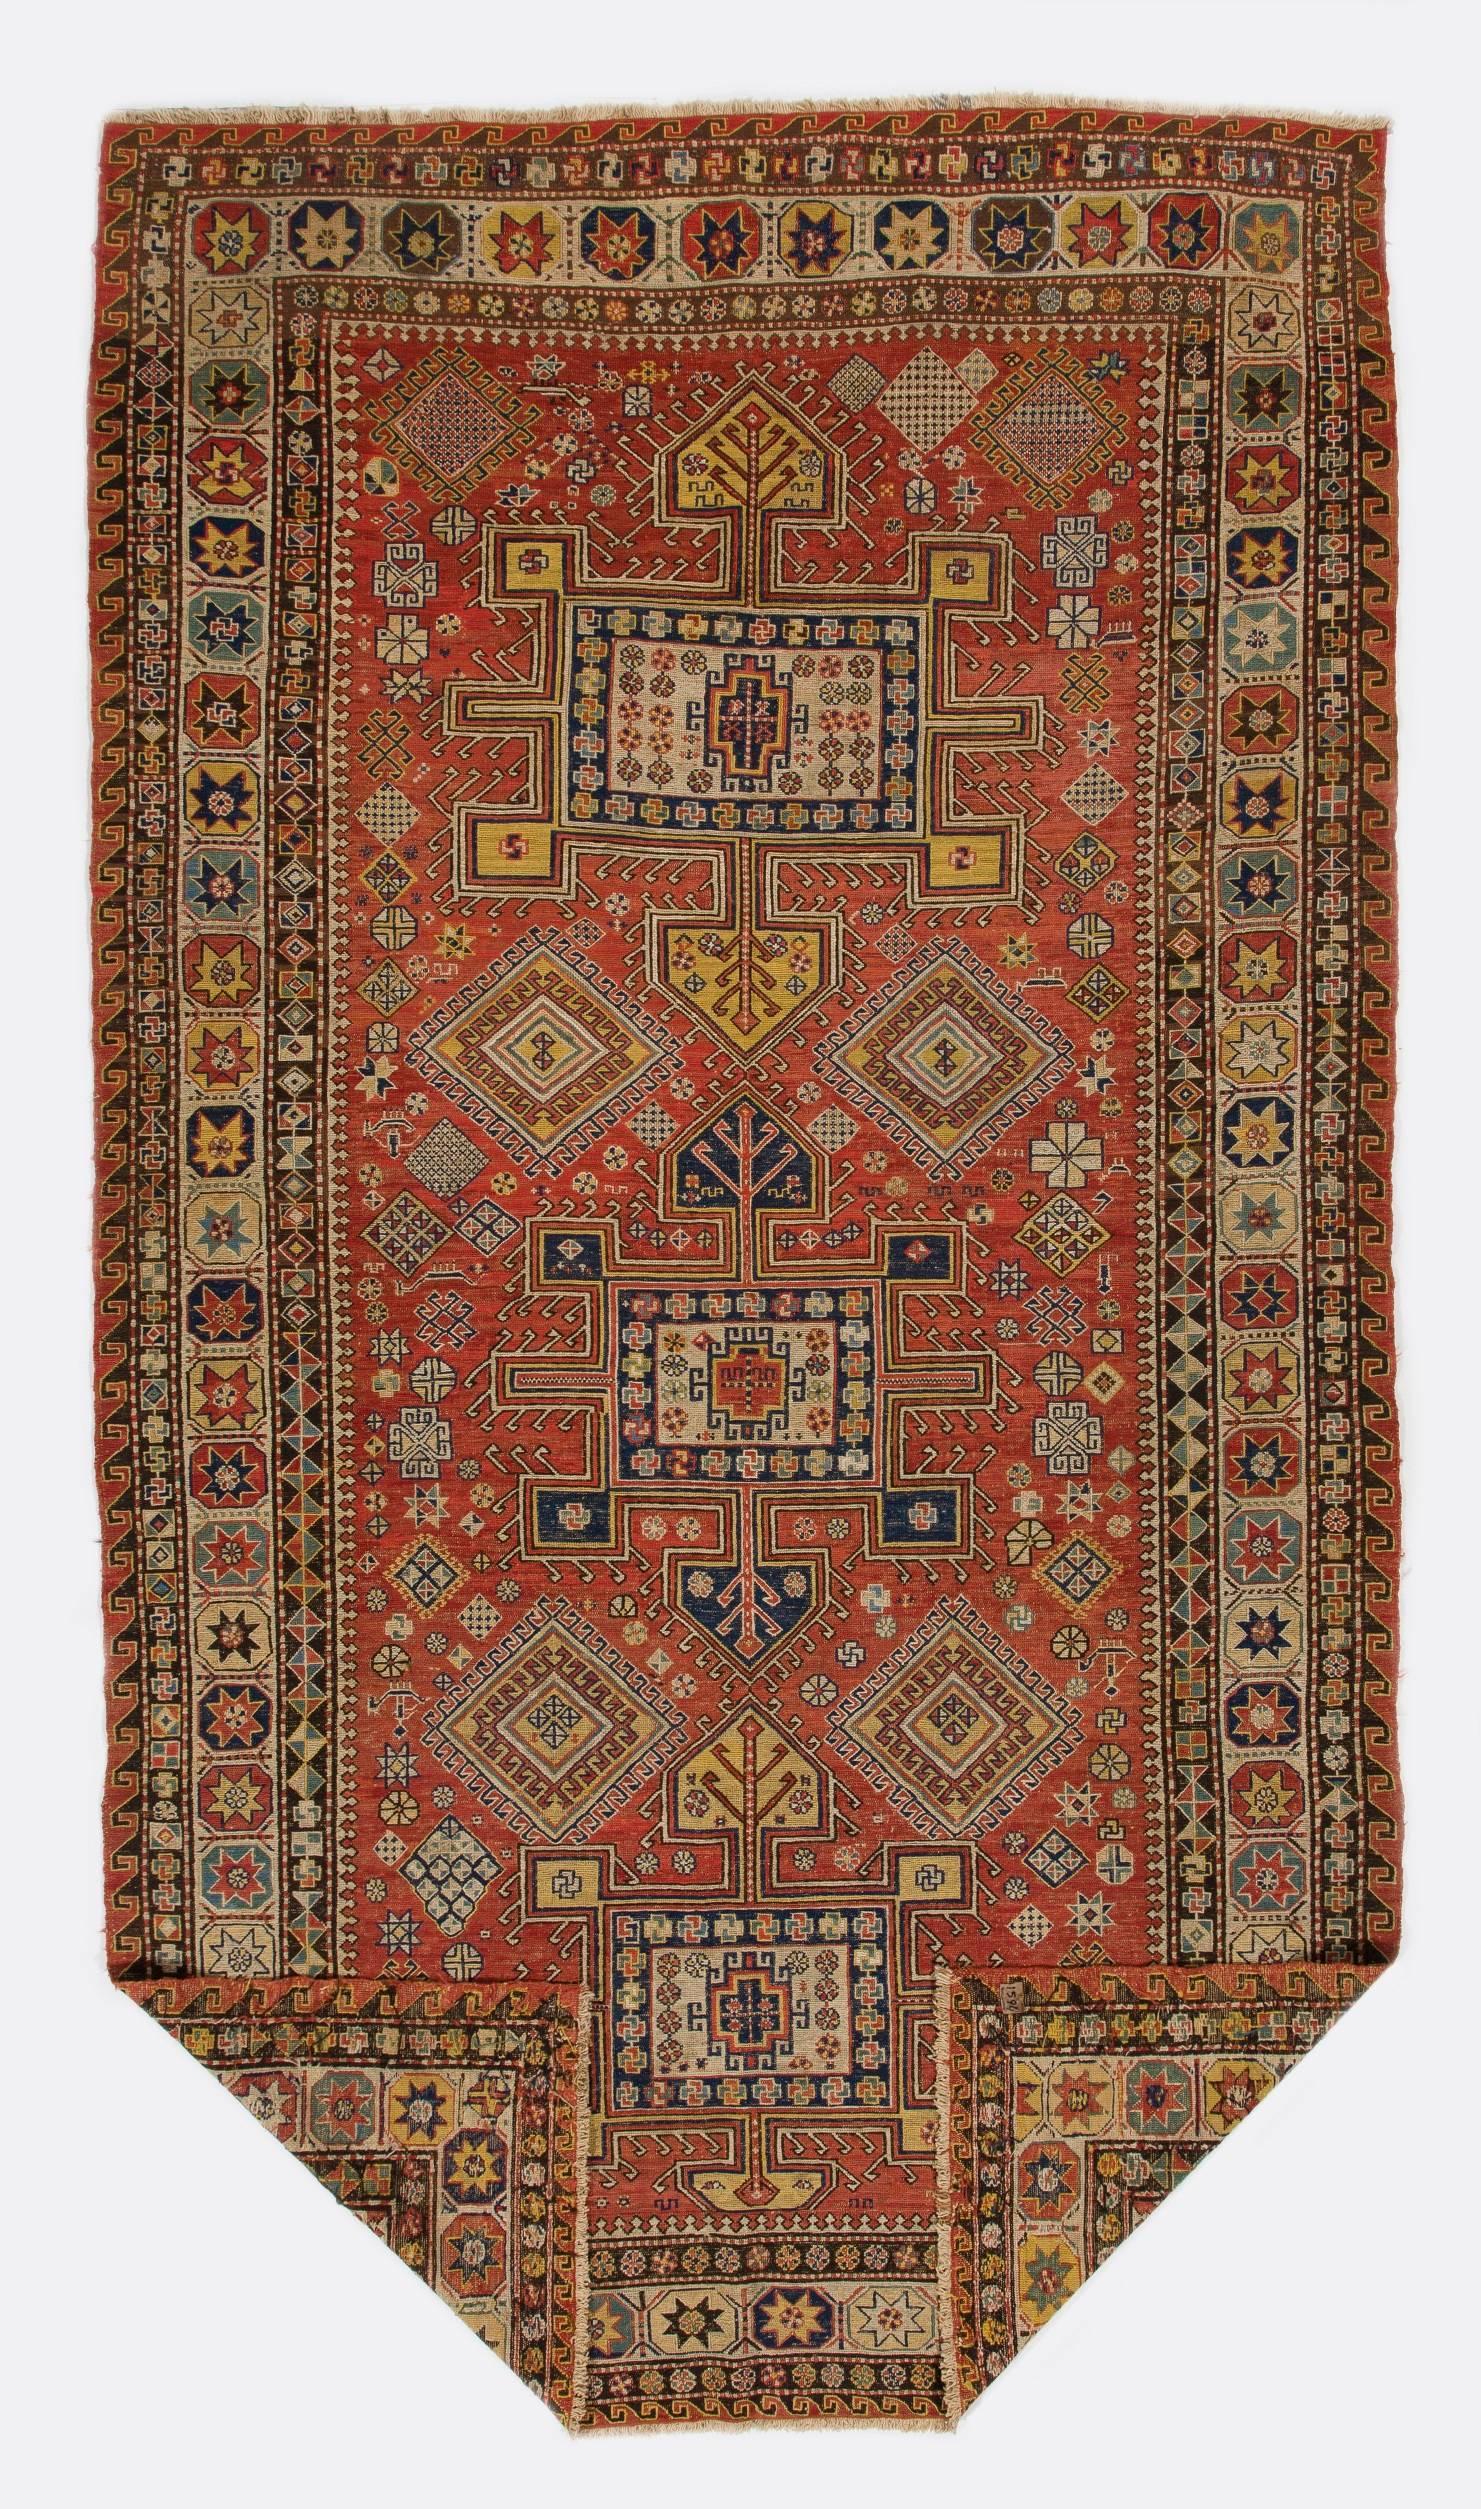 Soumak (also spelled Soumakh, Sumak, Sumac, or Soumac) is a tapestry technique of weaving strong and decorative textiles used as rugs and domestic bags. Soumak is a type of flat-weave, somewhat resembling but stronger and thicker than Kilim, with a